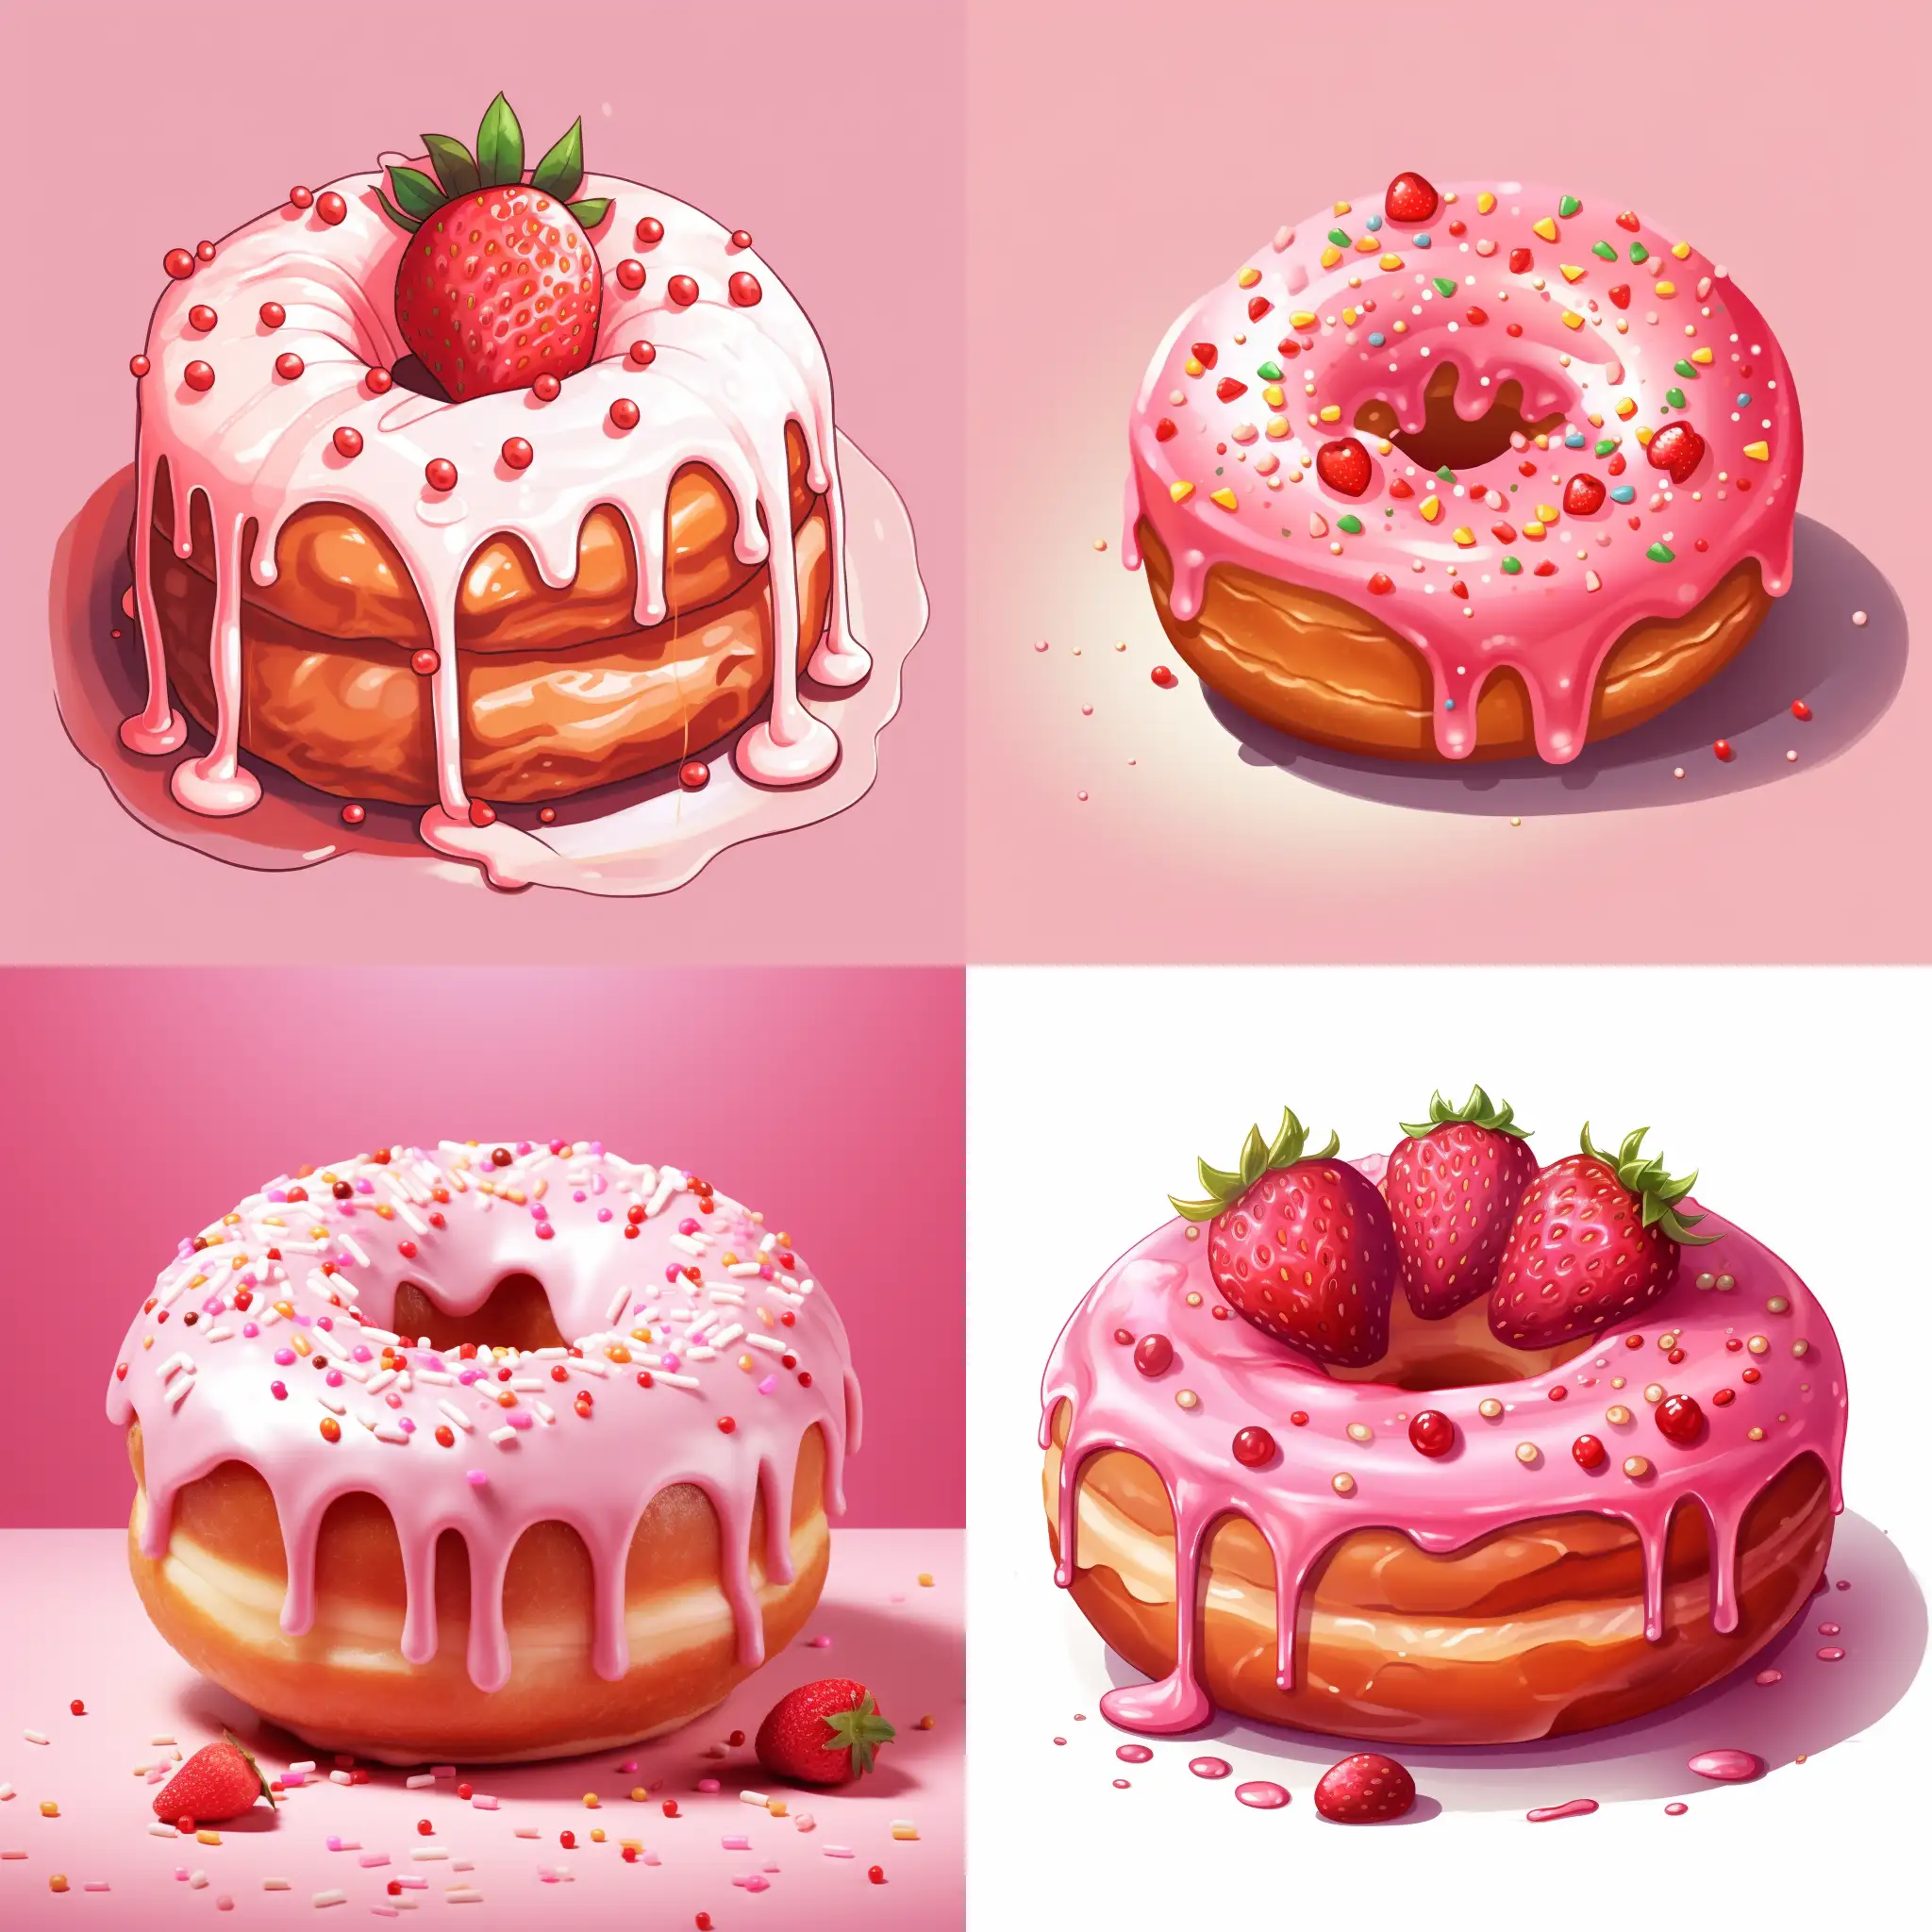 Delicious-Strawberry-Juicy-Donut-with-Sprinkles-Irresistible-Sweet-Treat